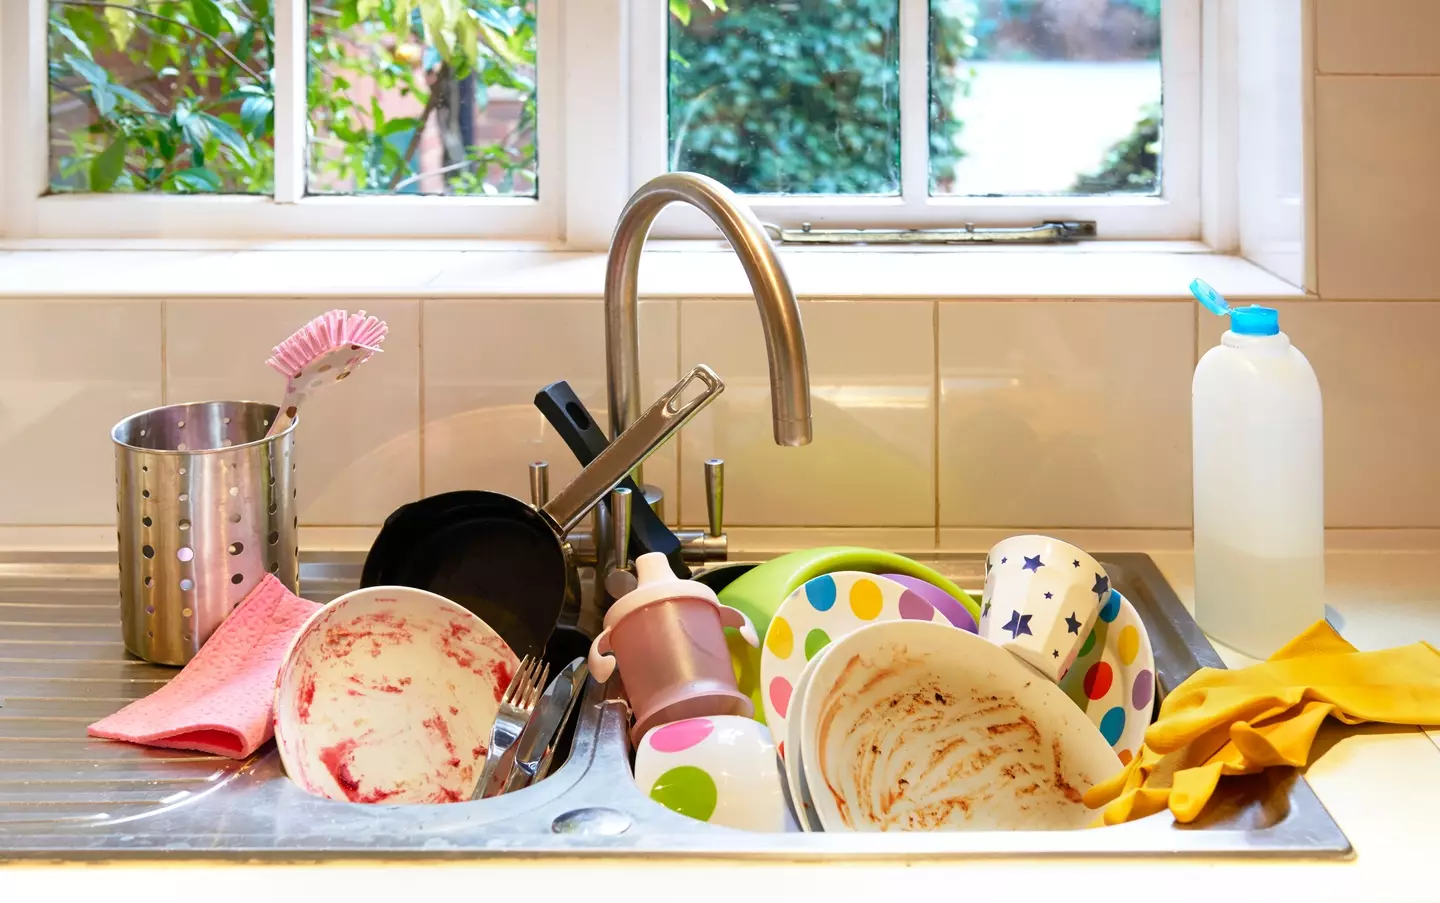 Please just do your washing up instead of leaving your dishes to 'soak' for days.